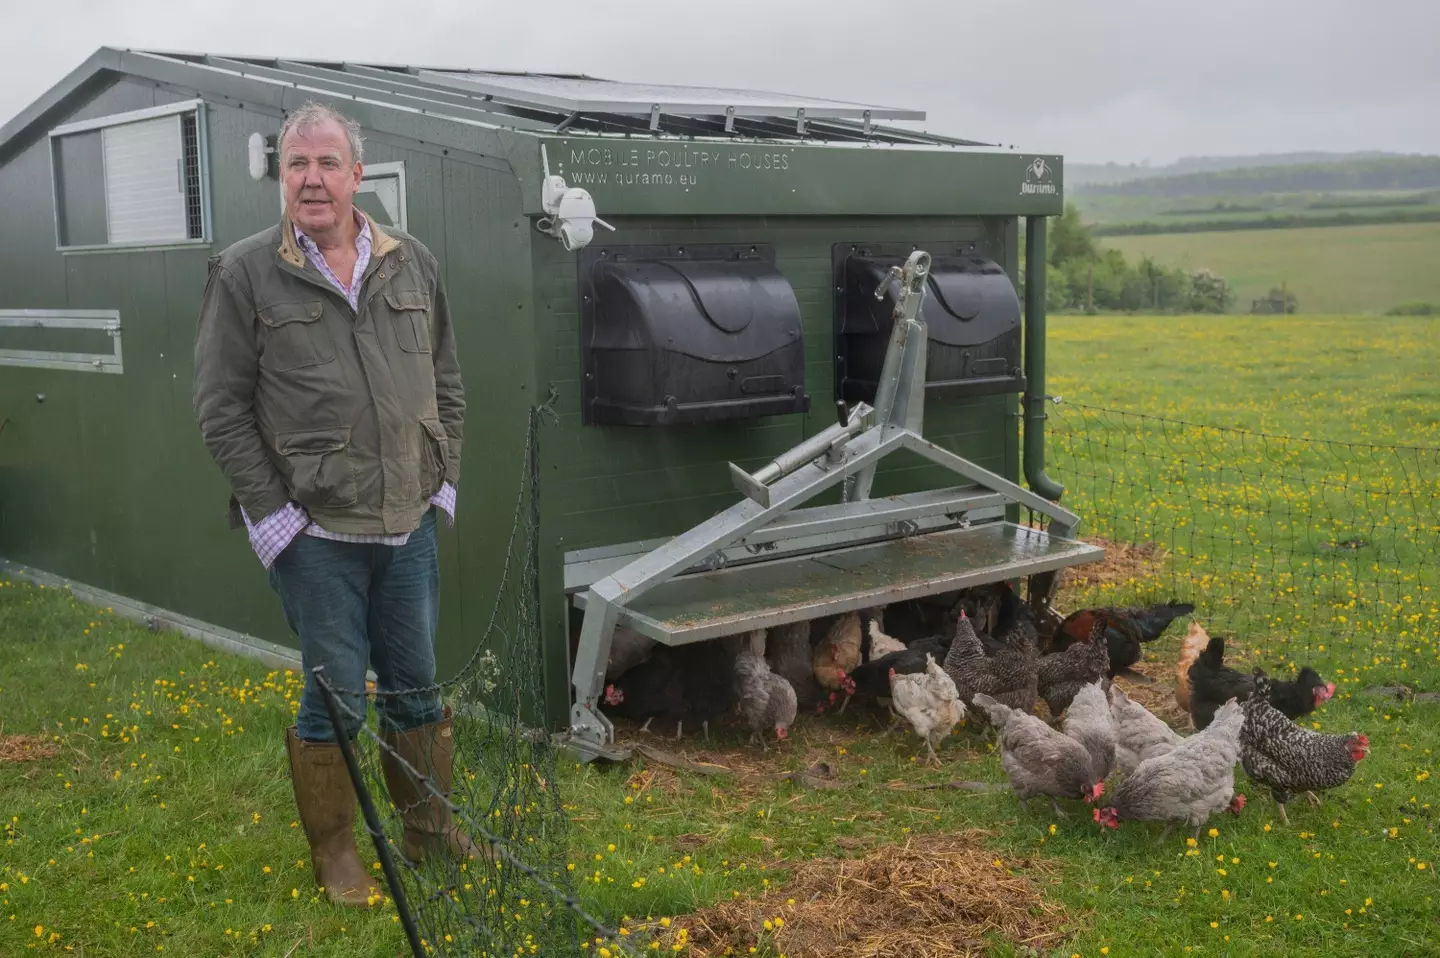 Clarkson said there's 'a lot of jumping' involved in farming, which wreaks havoc on his body.